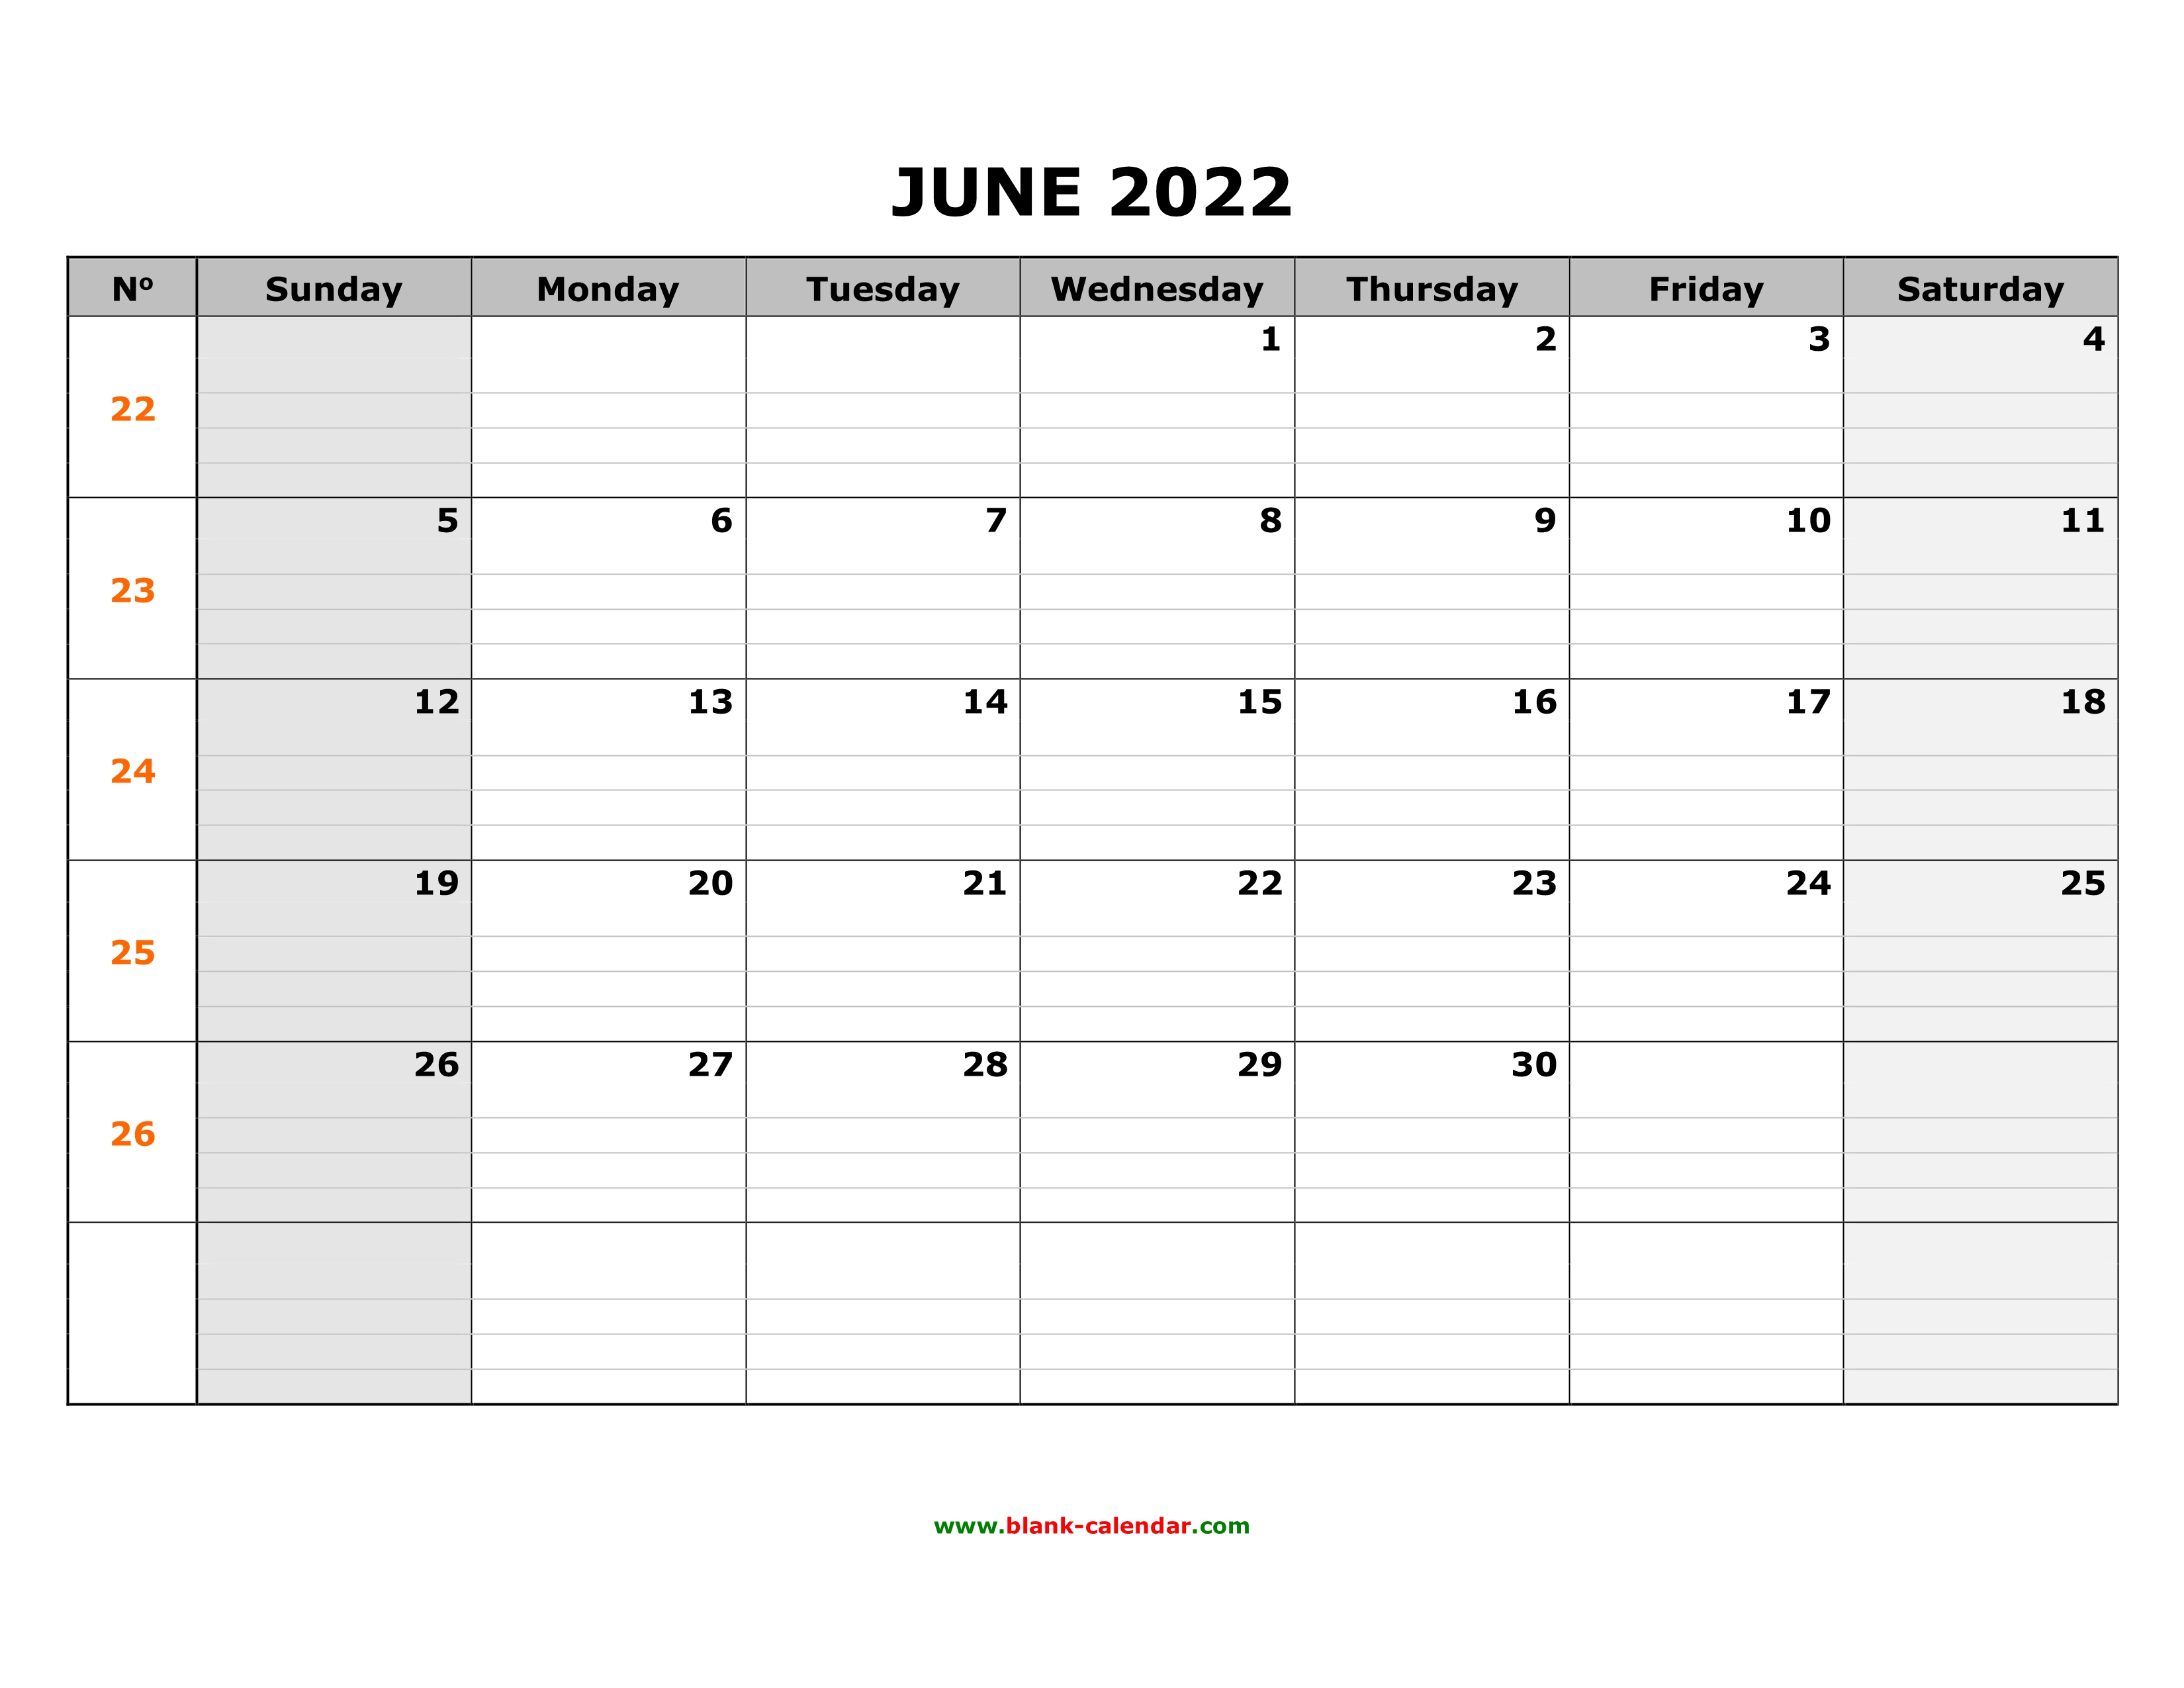 Free Download Printable June 2022 Calendar Large Box Grid Space For Notes